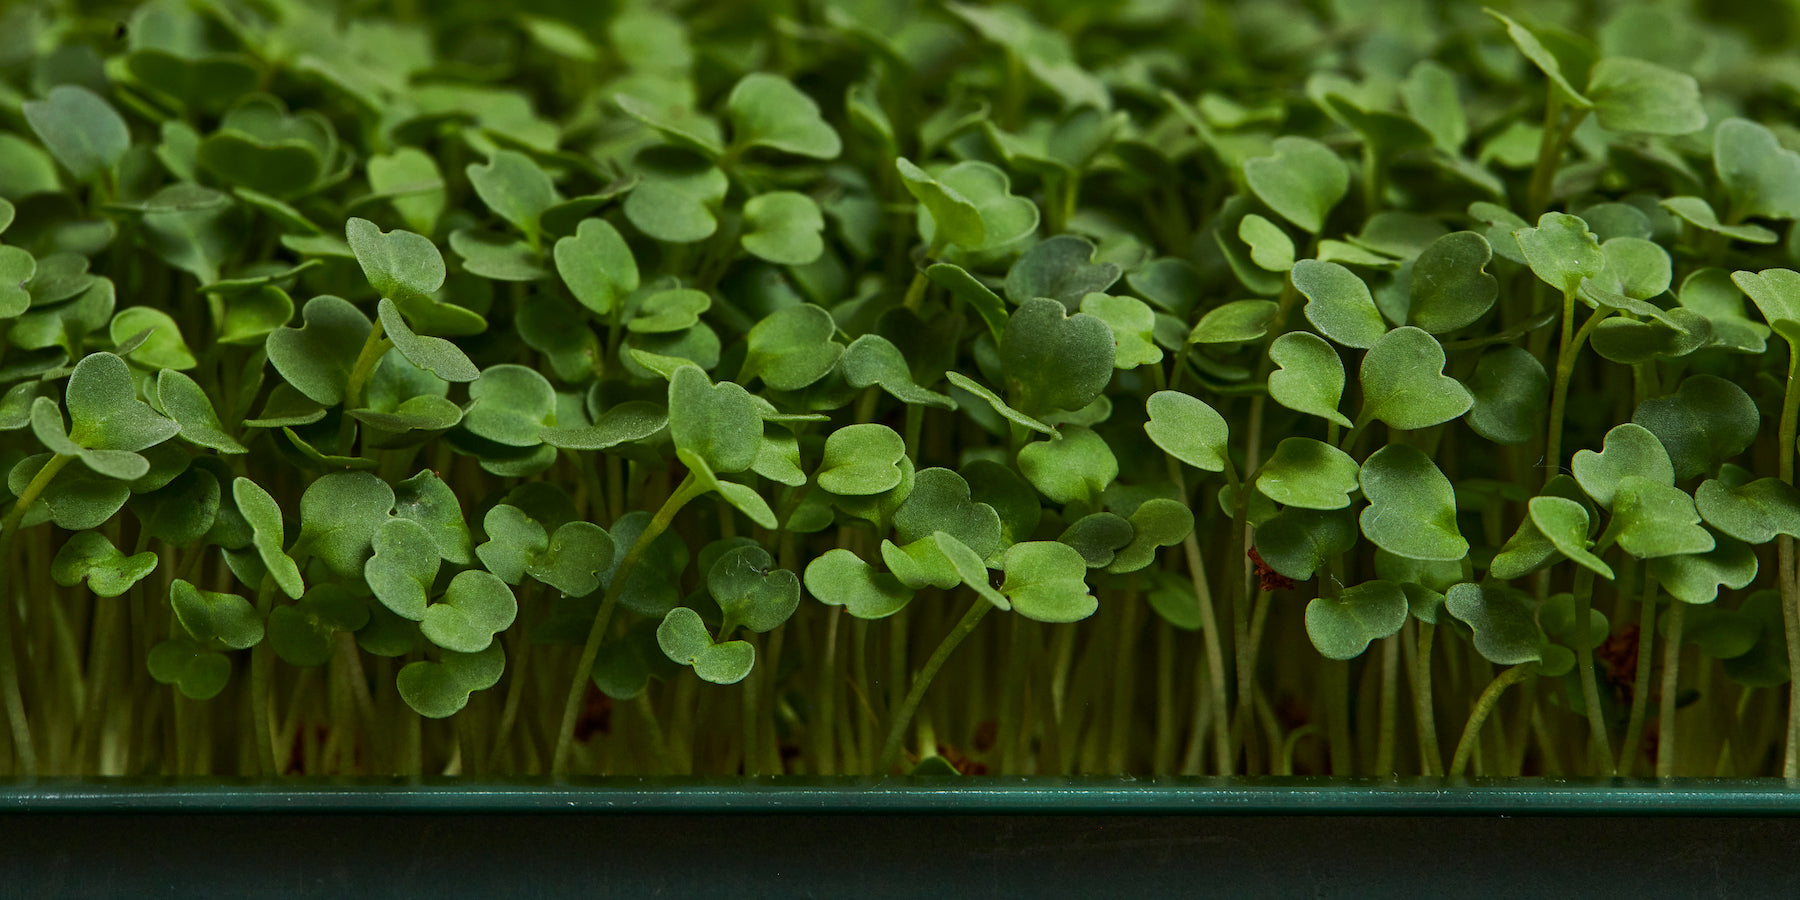 Arugula microgreen sprouts grown at home in the Fieldhouse by Leath - organic, non-GMO seeds